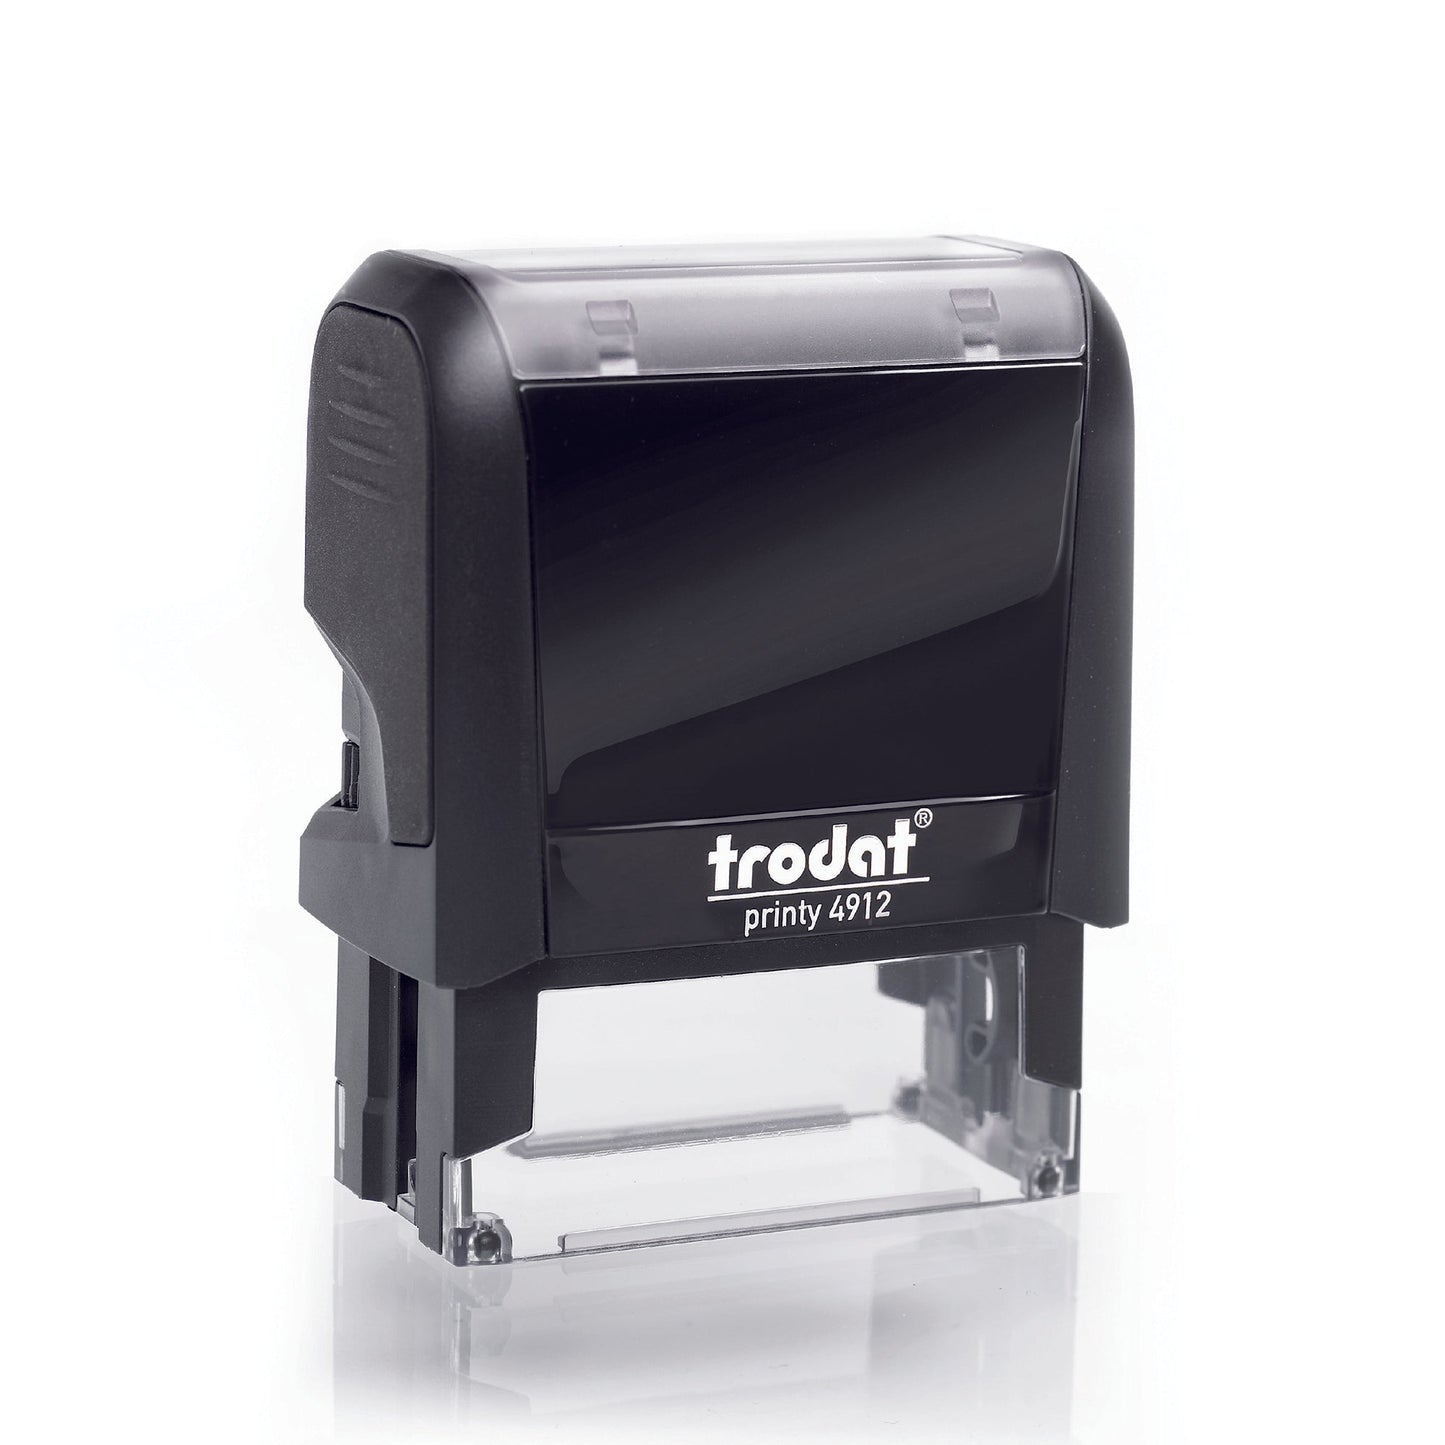 Packed - Rubber Stamp - Trodat 4912 - 43mm x 8mm Impression